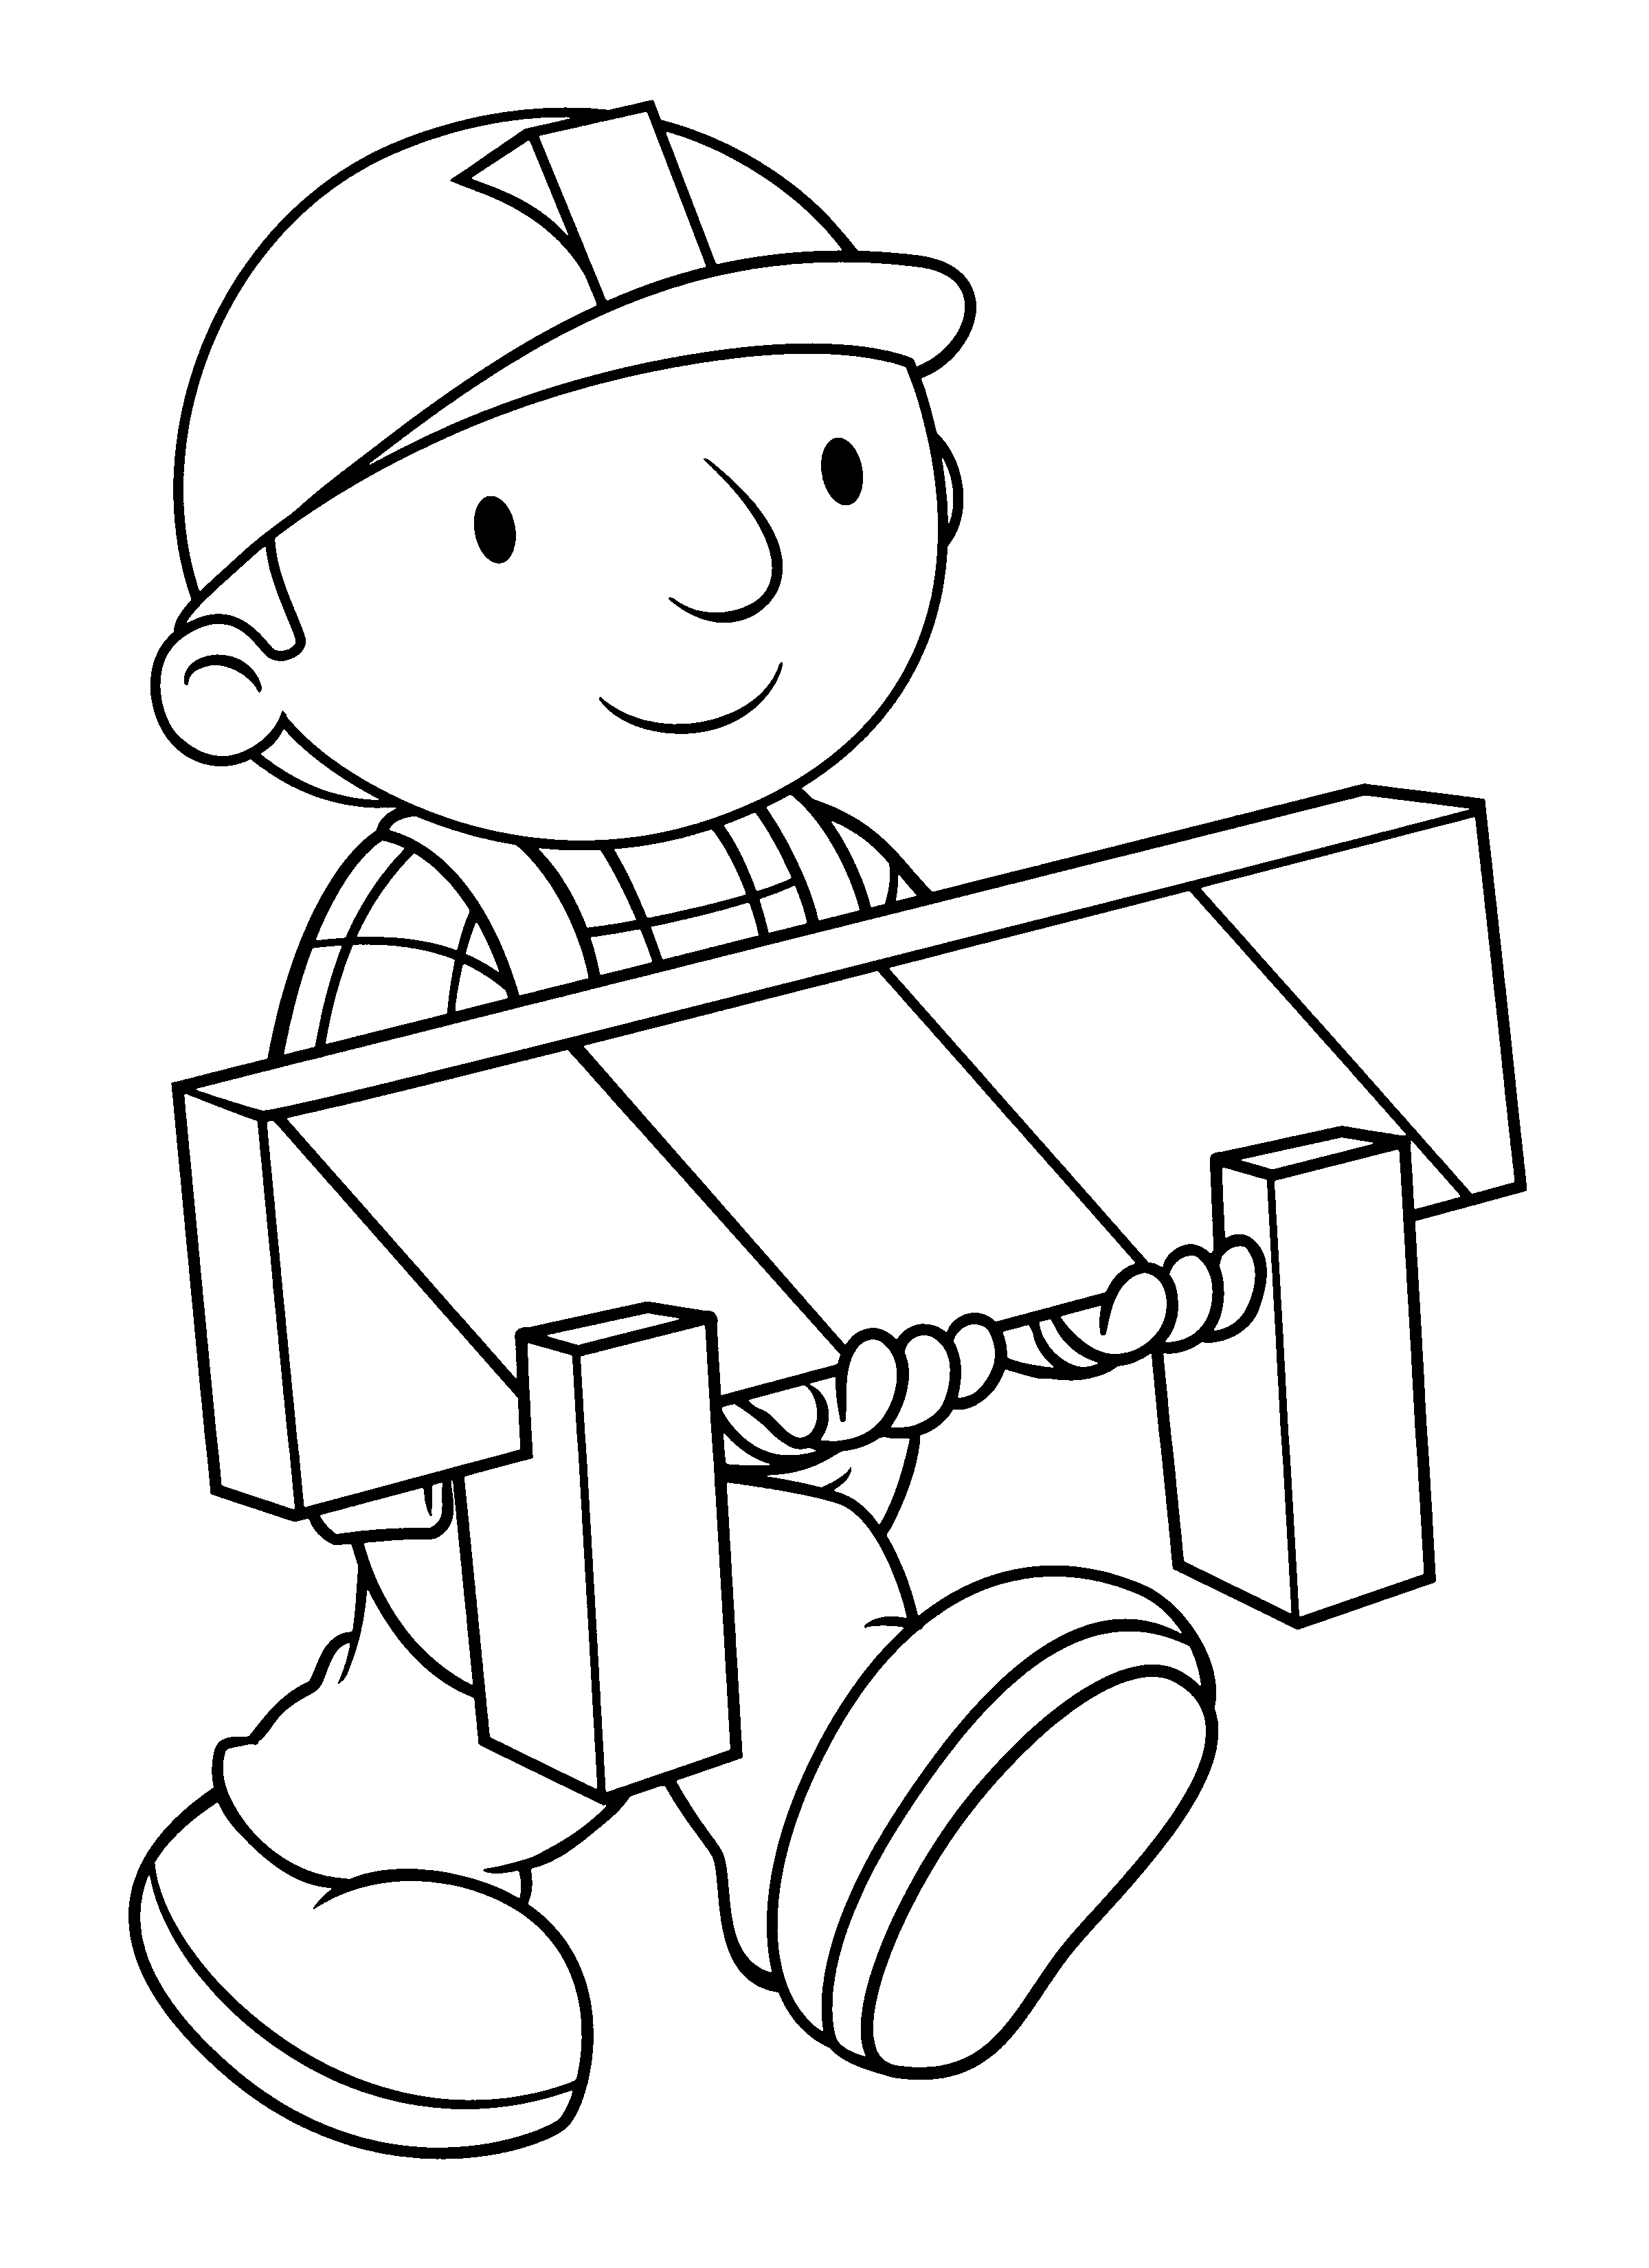 bob-the-builder-coloring-pages-to-download-and-print-for-free